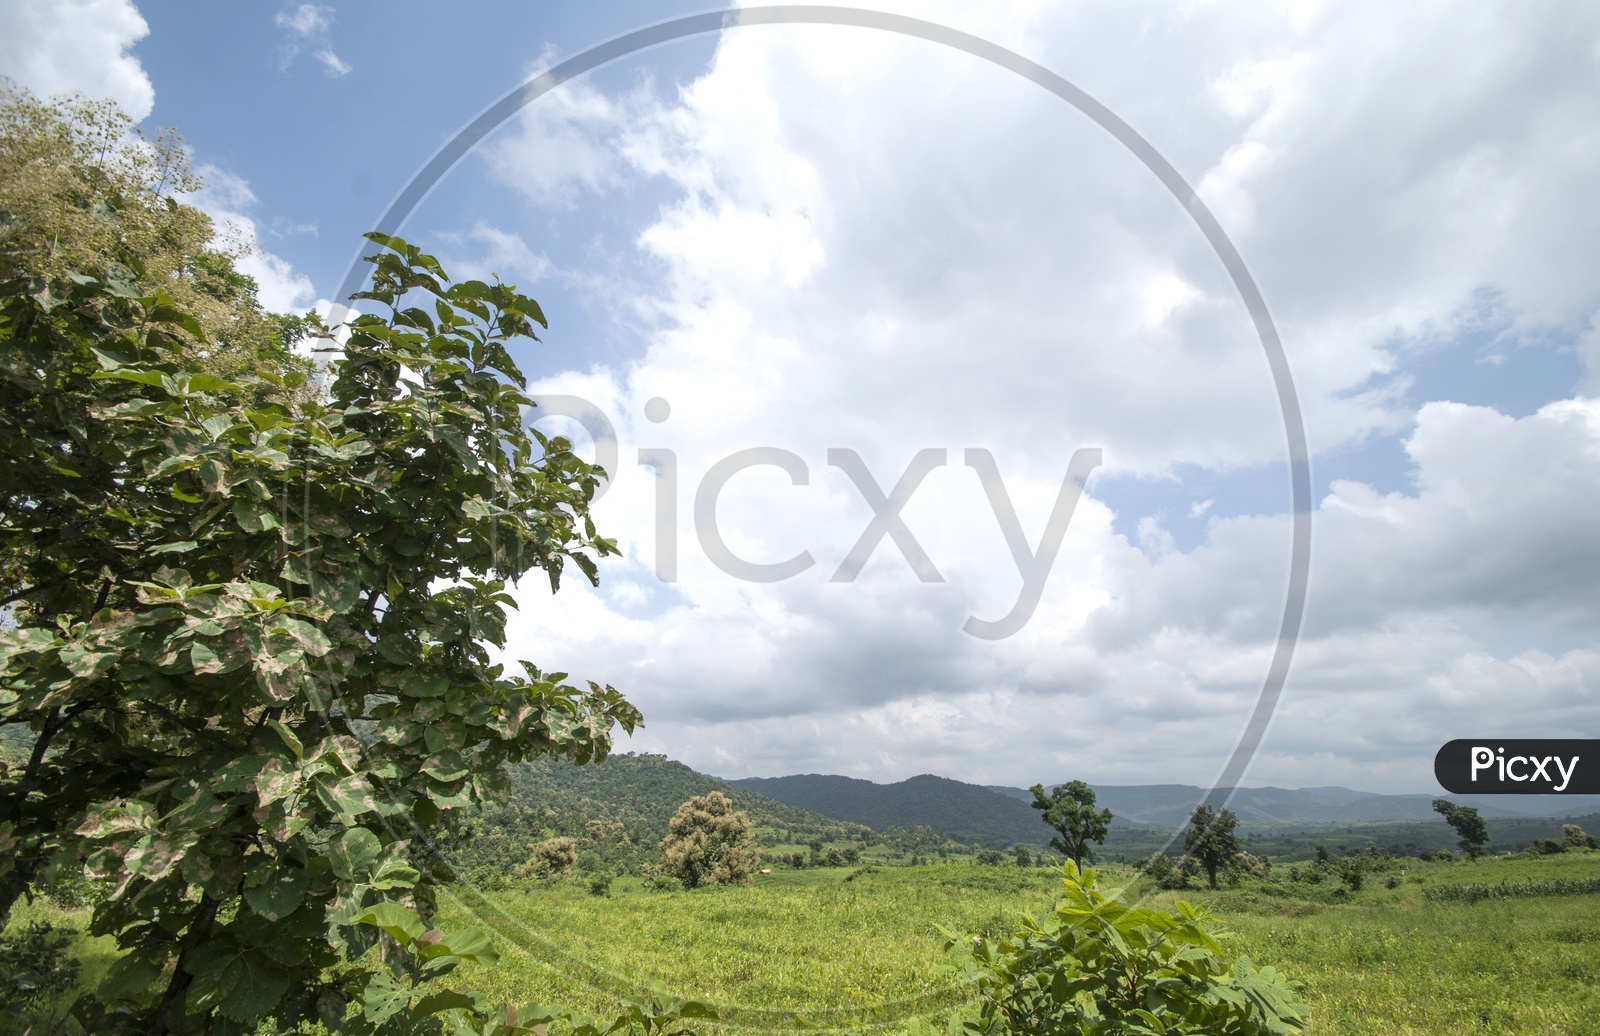 A Landscape With Agricultural Fields And Cotton Clouds in The Blue Sky